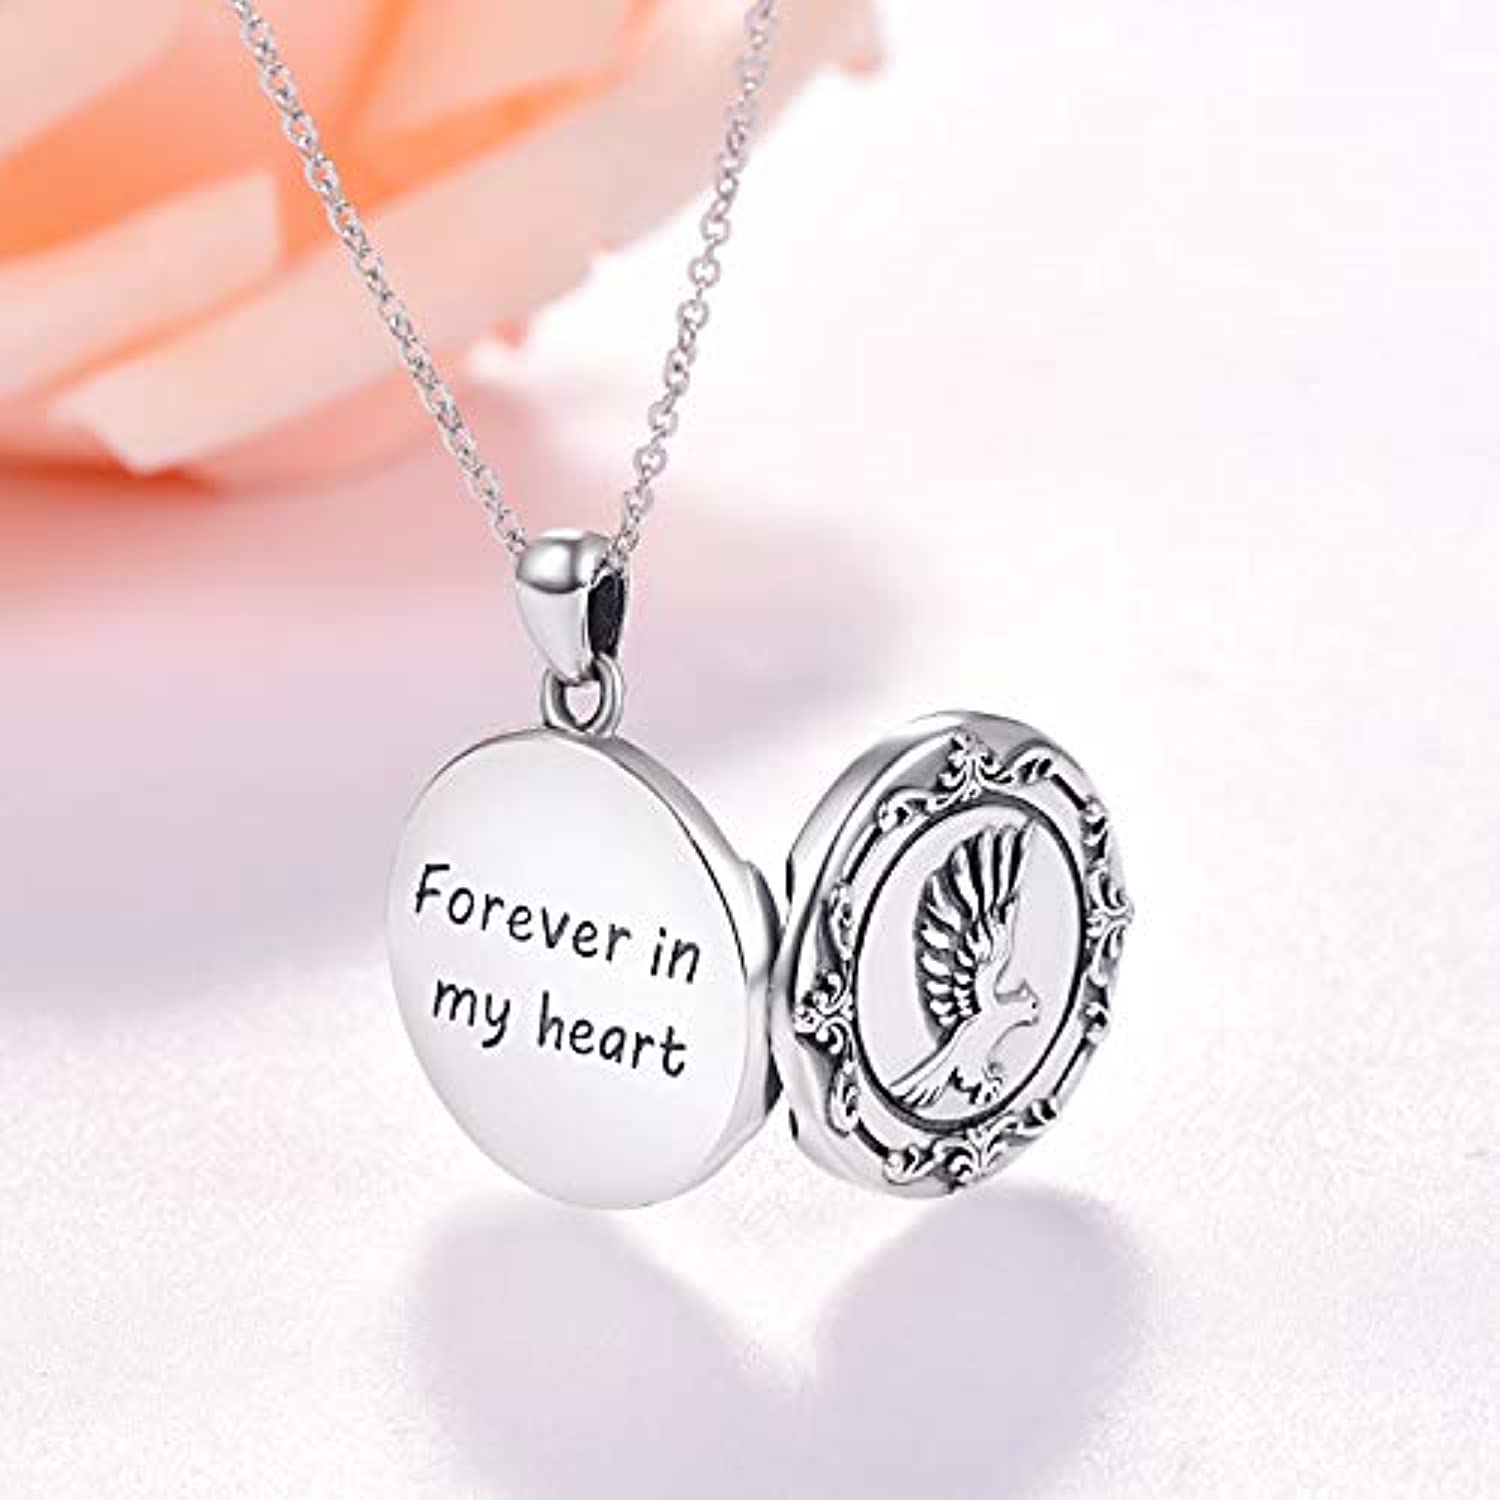 Harry-Potter Thunderbird Theme Locket Necklace For Women, 925 Sterling Silver Locket Necklace That Holds Pictures